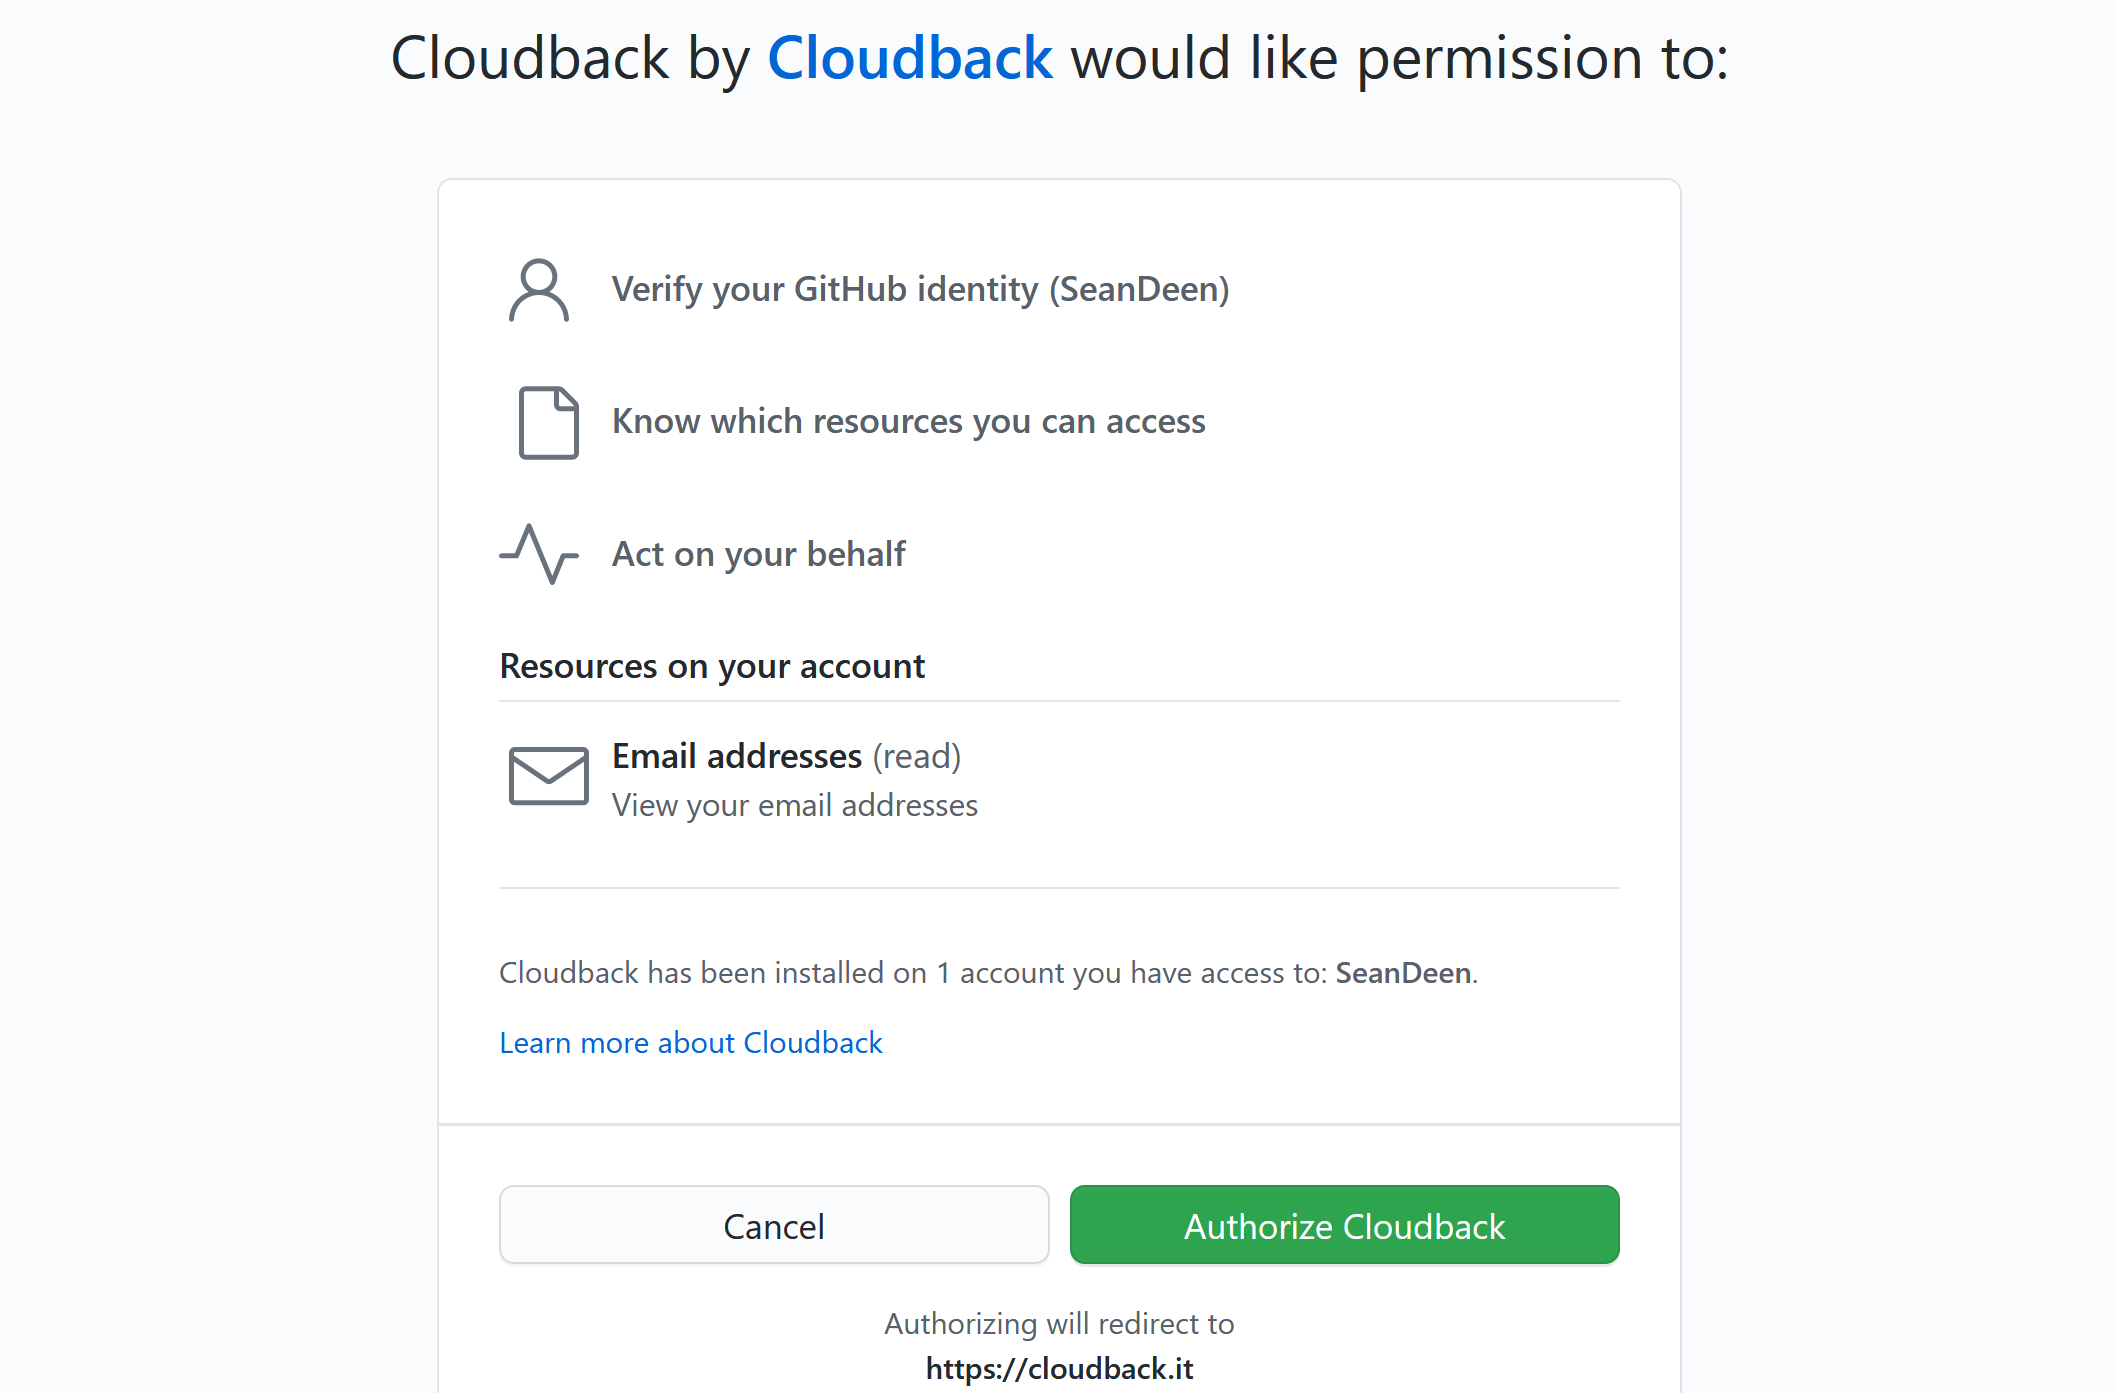 review Cloudback permissions and authorize application